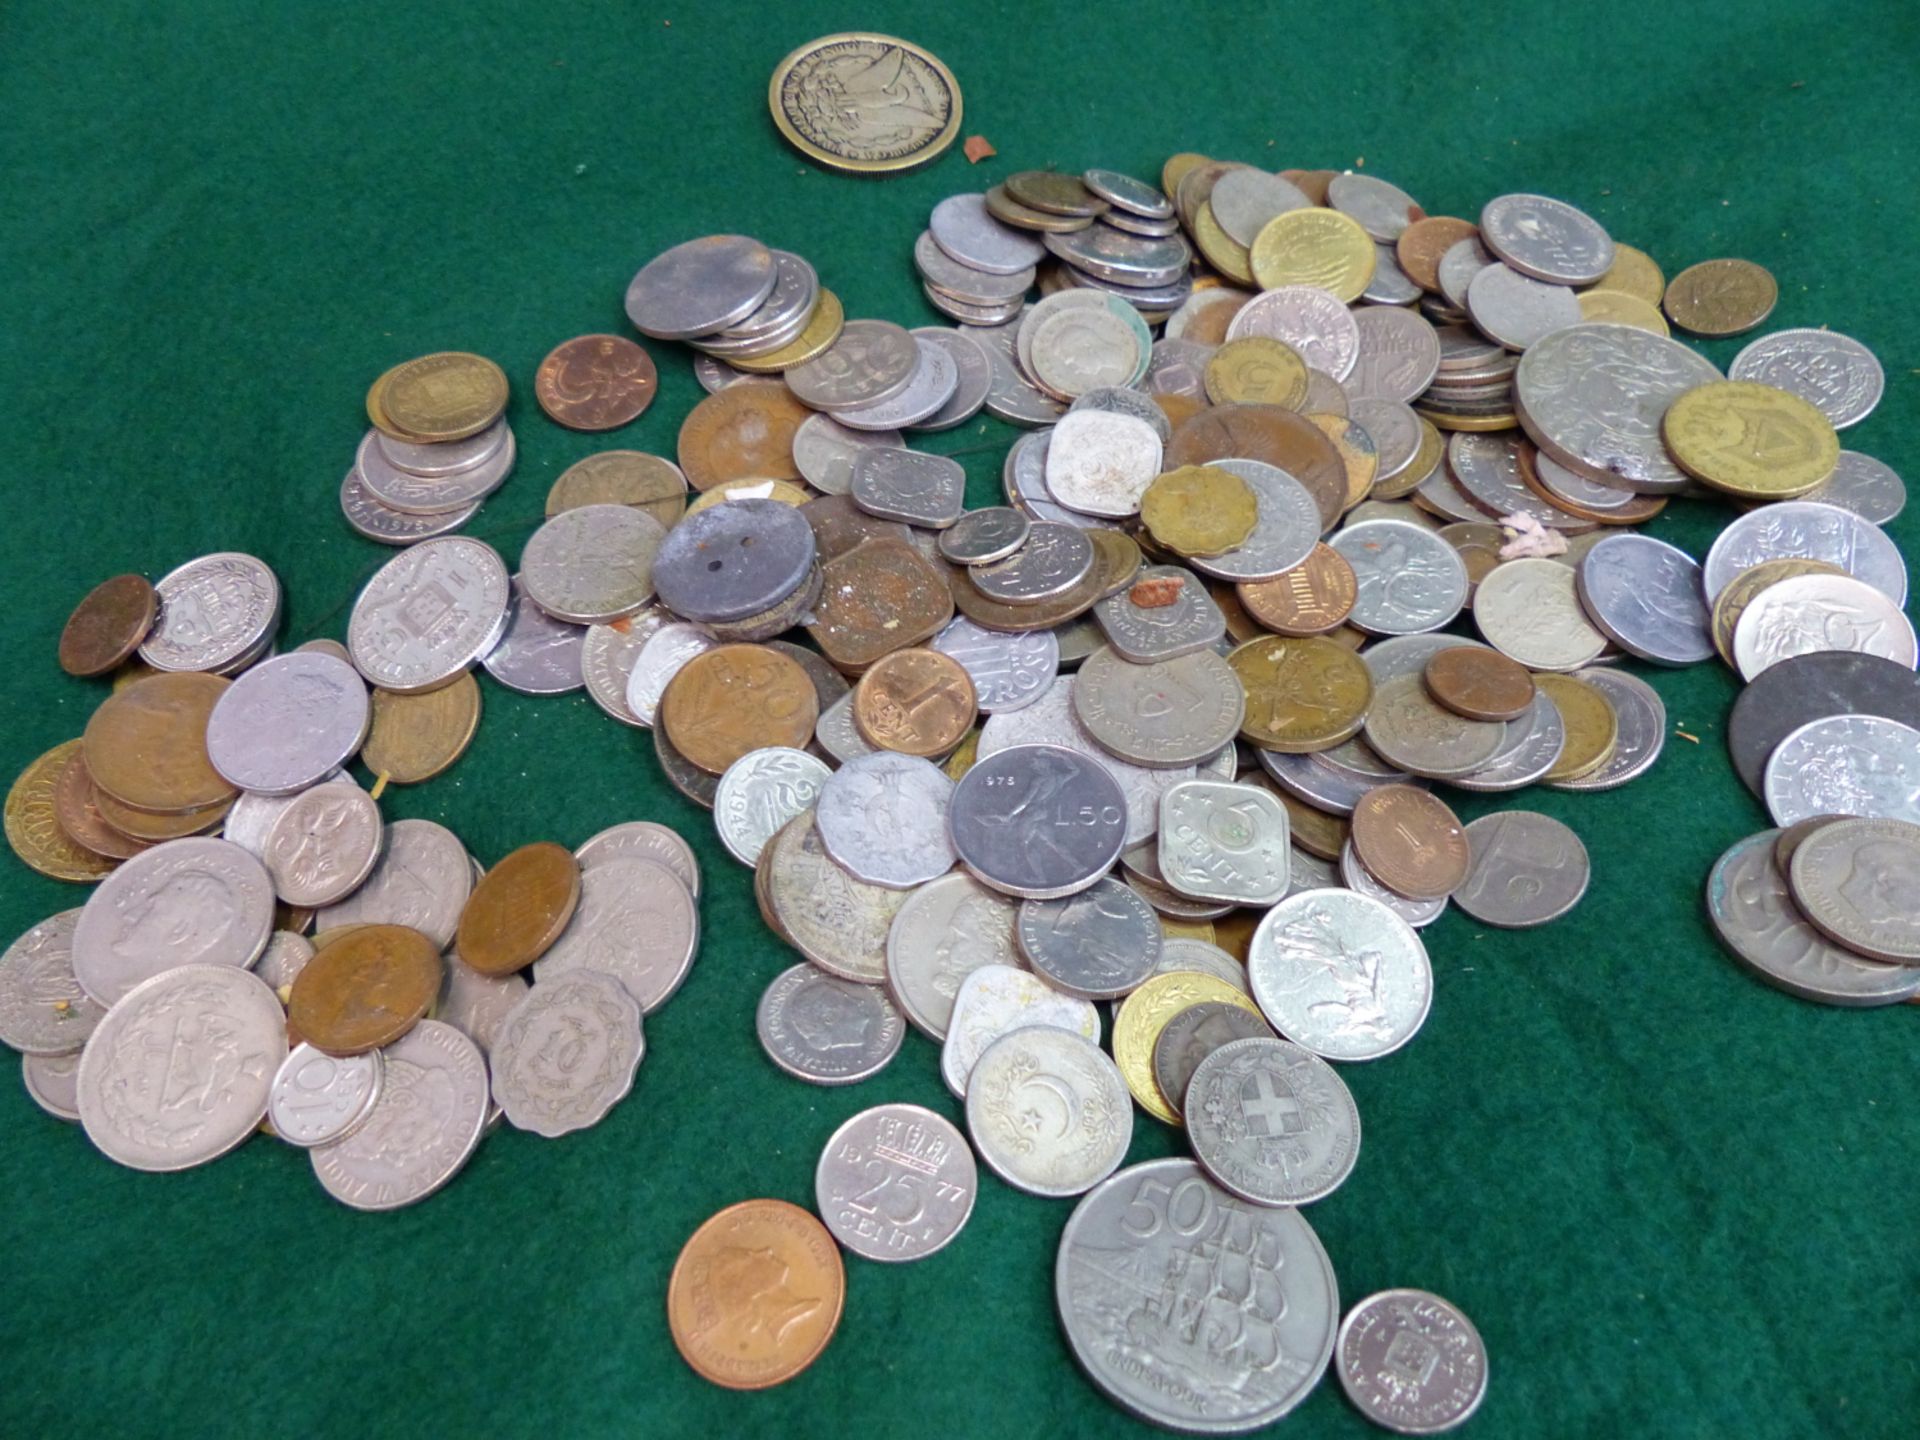 WORLD COINS: MAINLY 20th C. COPPER, BRASS AND SILVER DENOMINATIONS